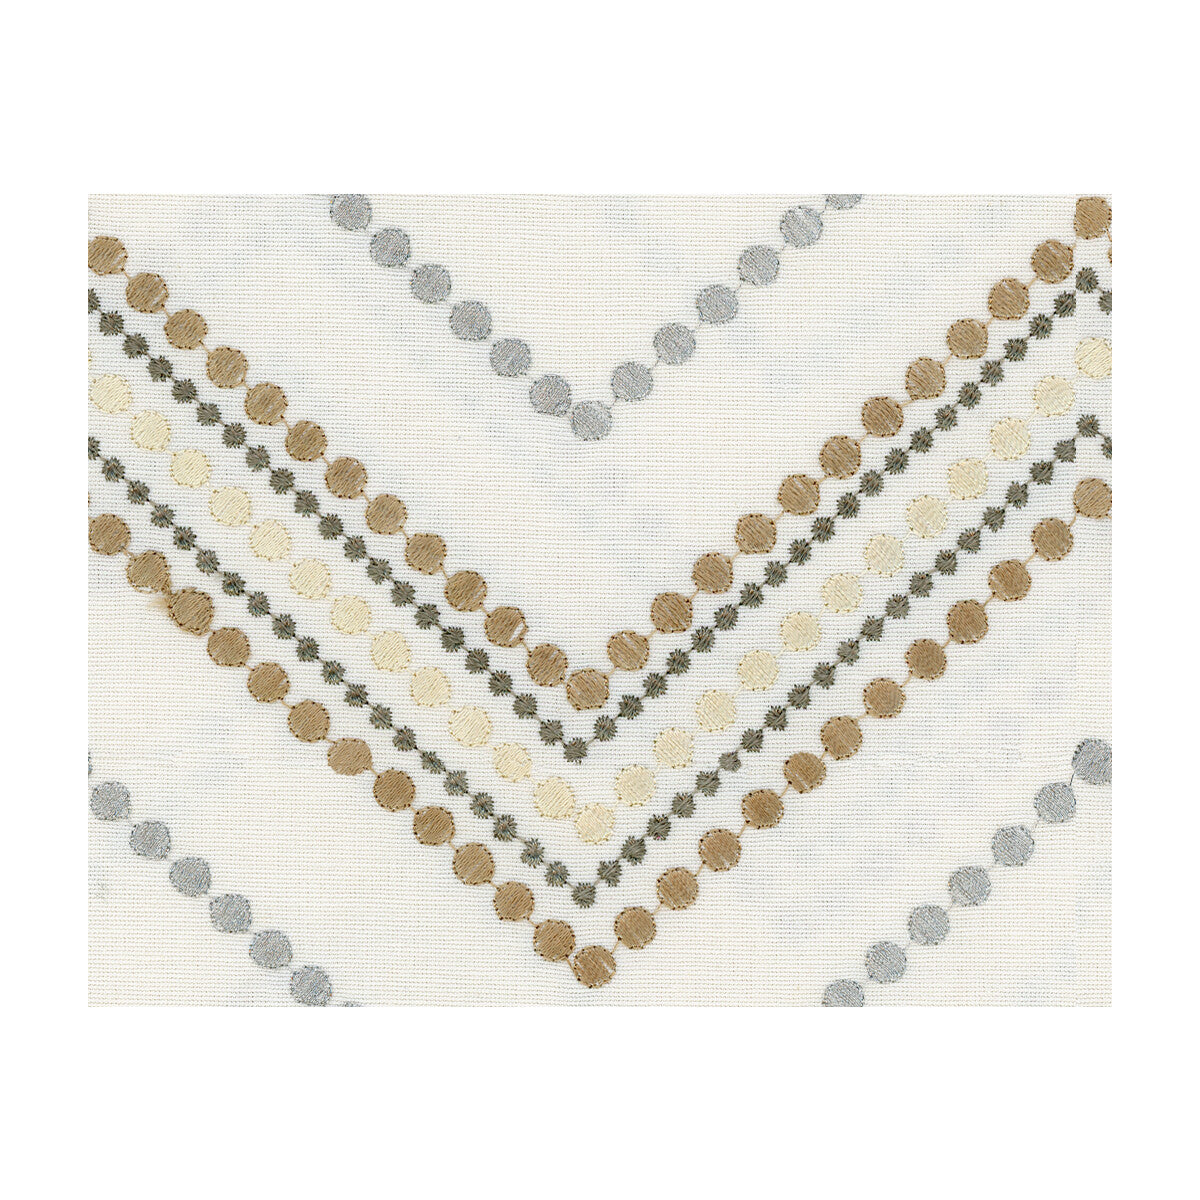 Azariah fabric in bronze color - pattern 34165.416.0 - by Kravet Design in the Candice Olson collection